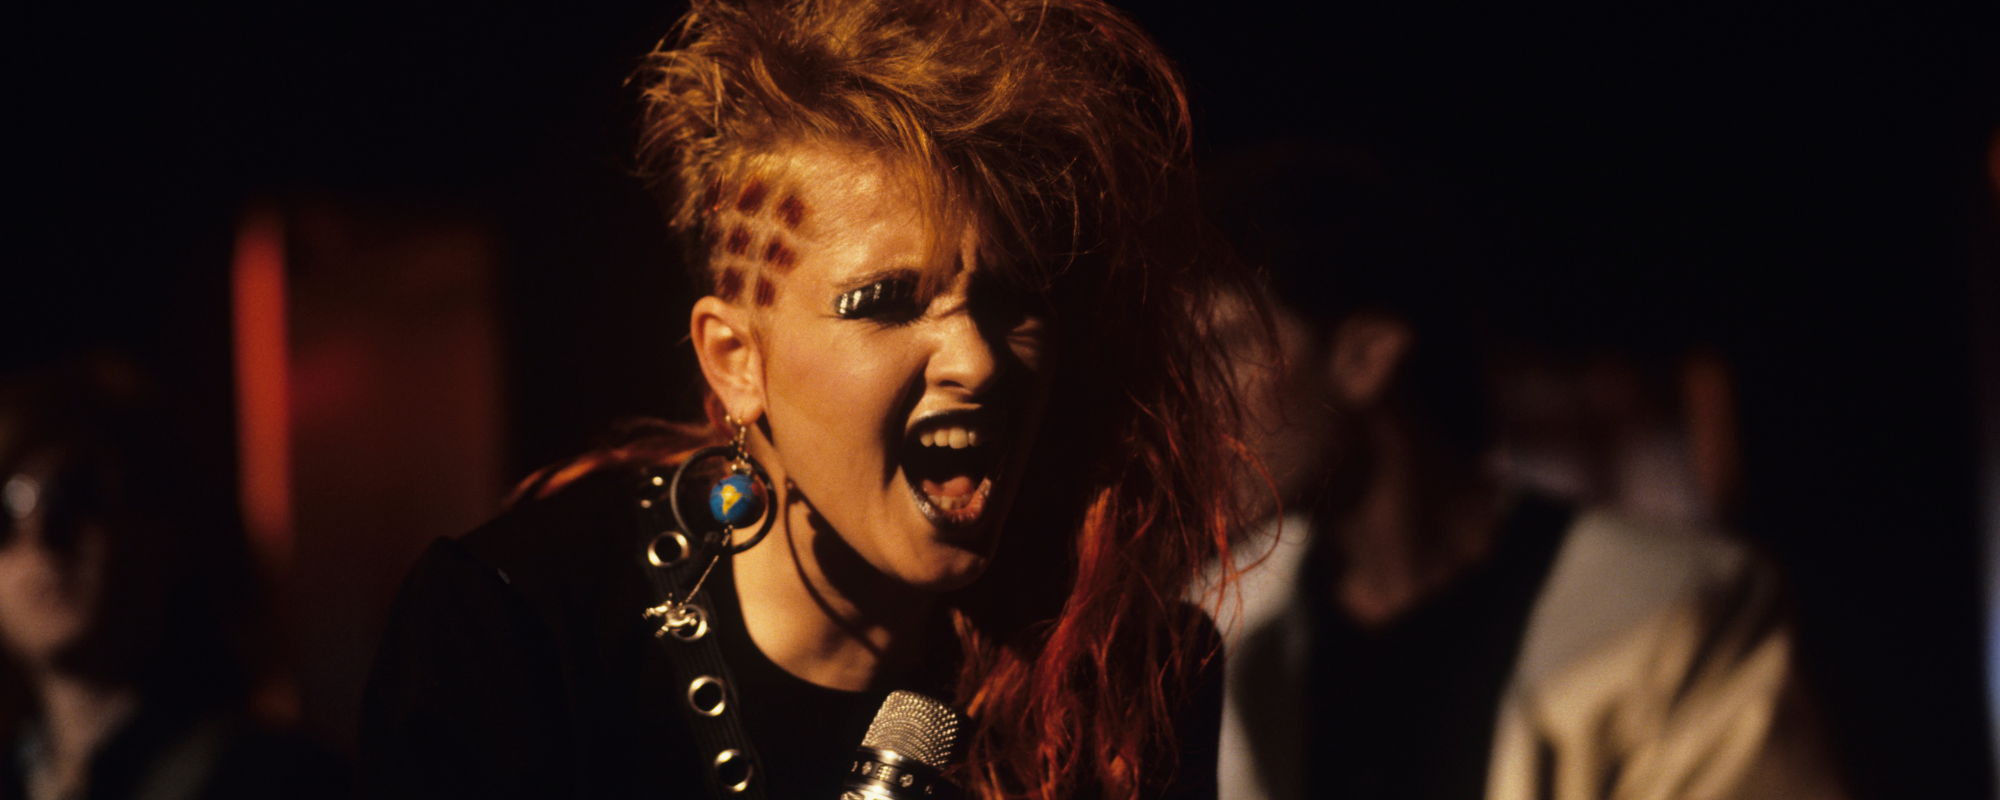 The Real Meaning Behind Cyndi Lauper’s Saucy Self-Love Serenade, “She Bop”